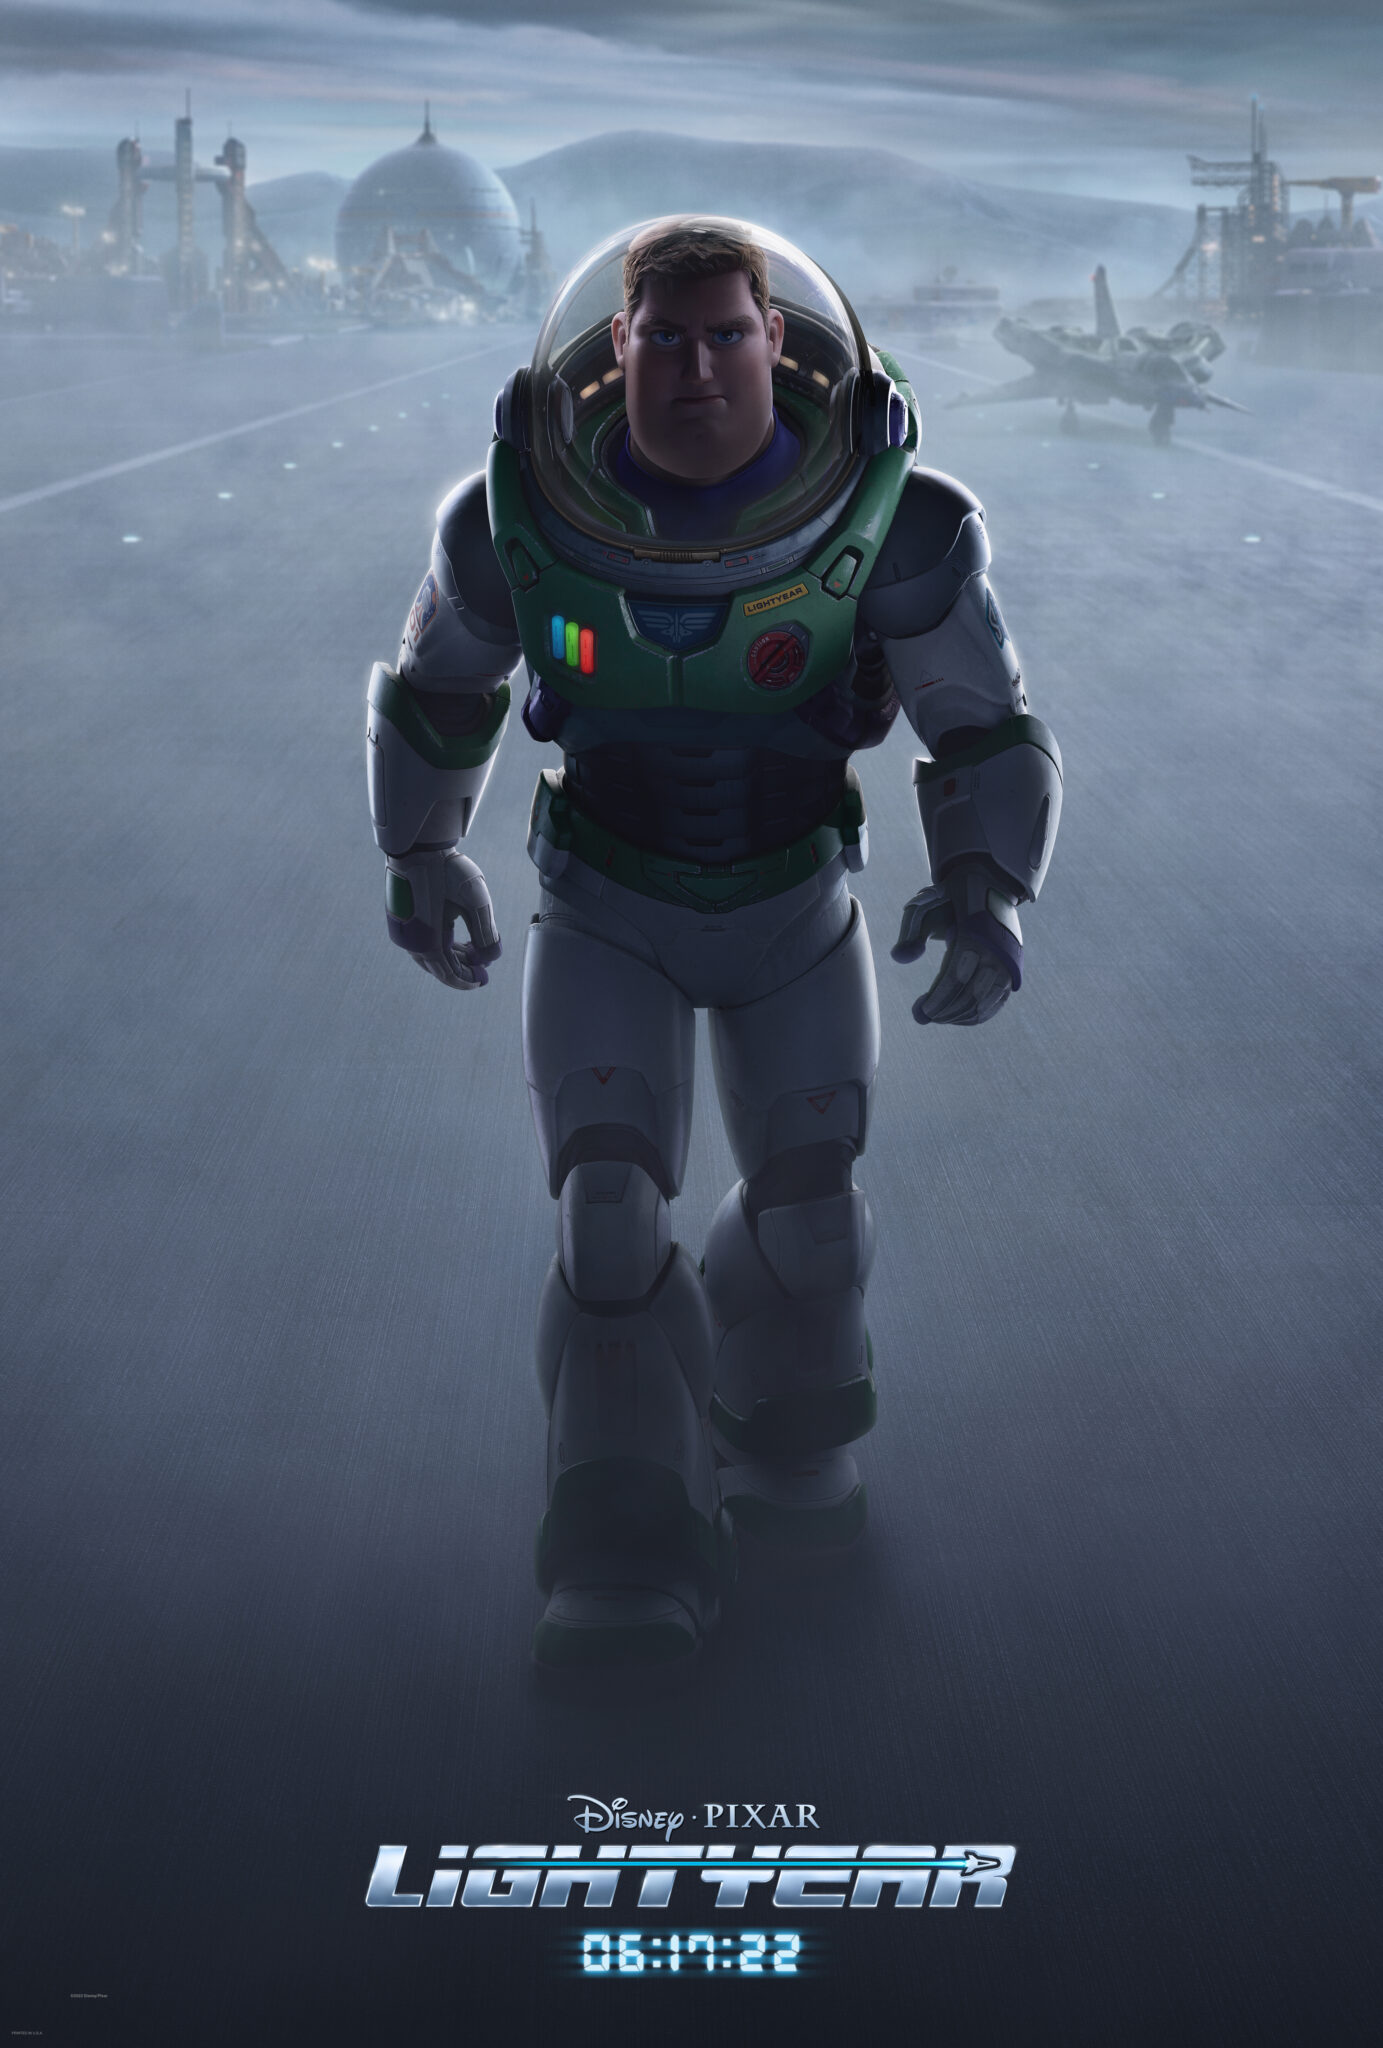 Watch the New Trailer for Disney and Pixar's Lightyear! #Lightyear